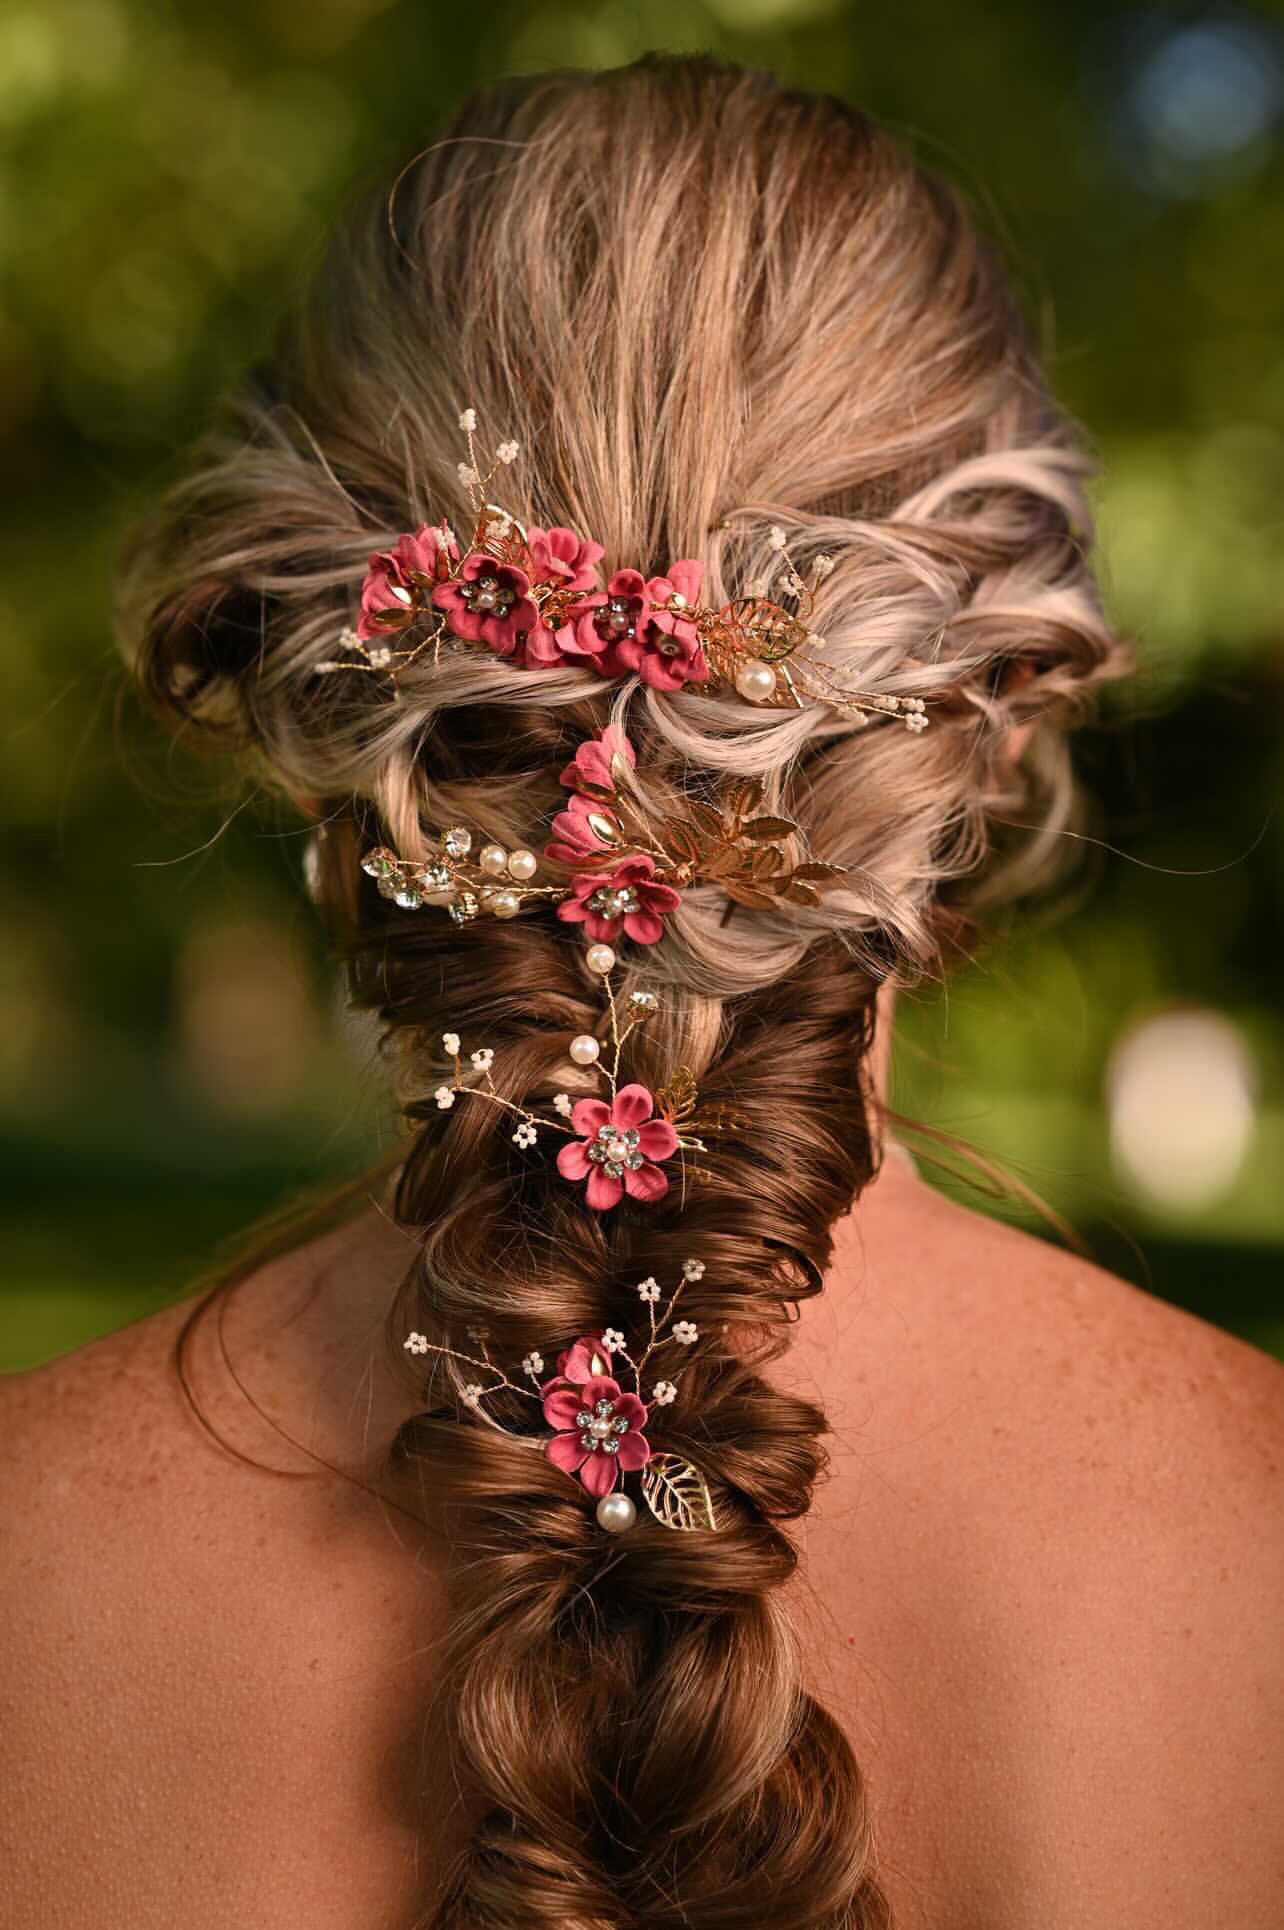 Bridal hair piece with Imitation Pearls, Faux Flowers and Zircon Adornments